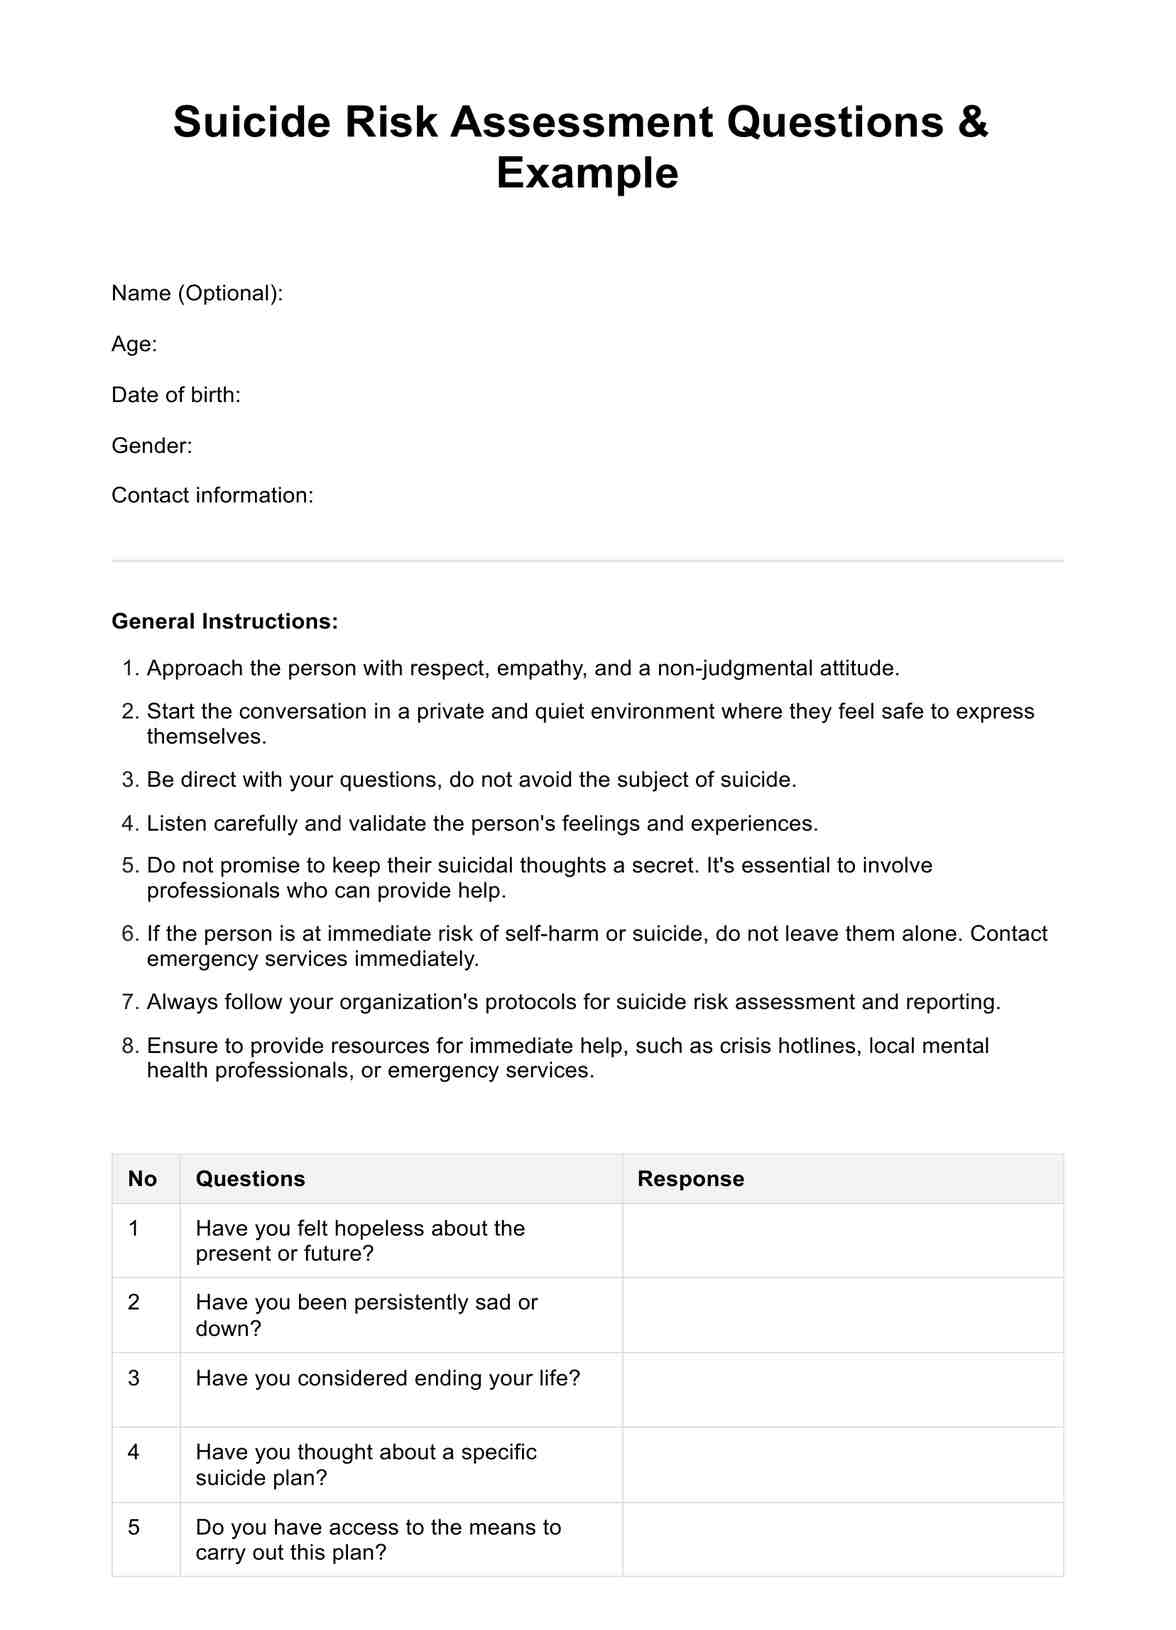 Suicide Risk Assessment Questions PDF Example